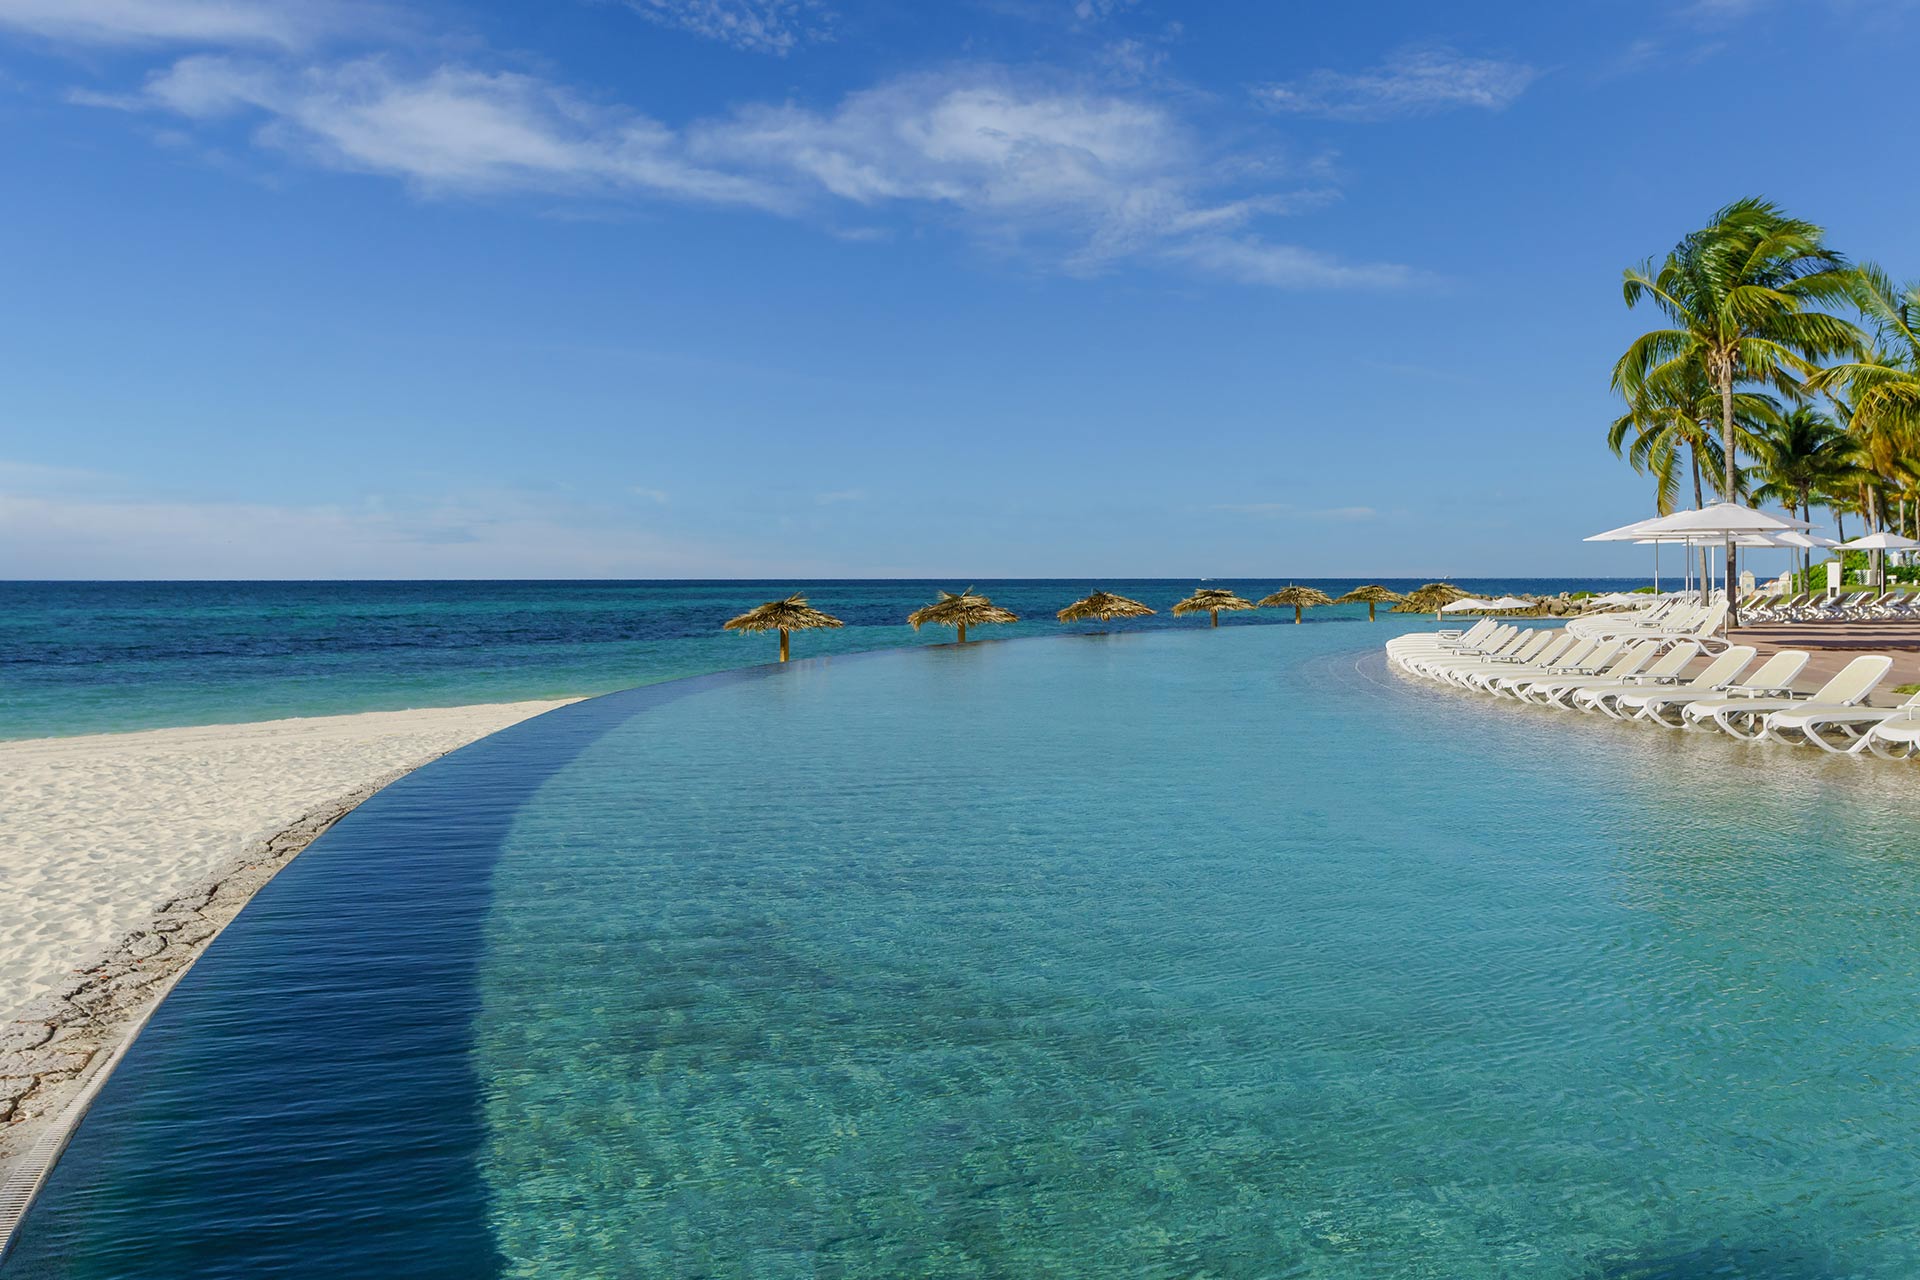 Lighthouse Pointe at Grand Lucayan Resort in the Bahamas; Photo Courtesy of Lighthouse Pointe at Grand Lucayan Resort